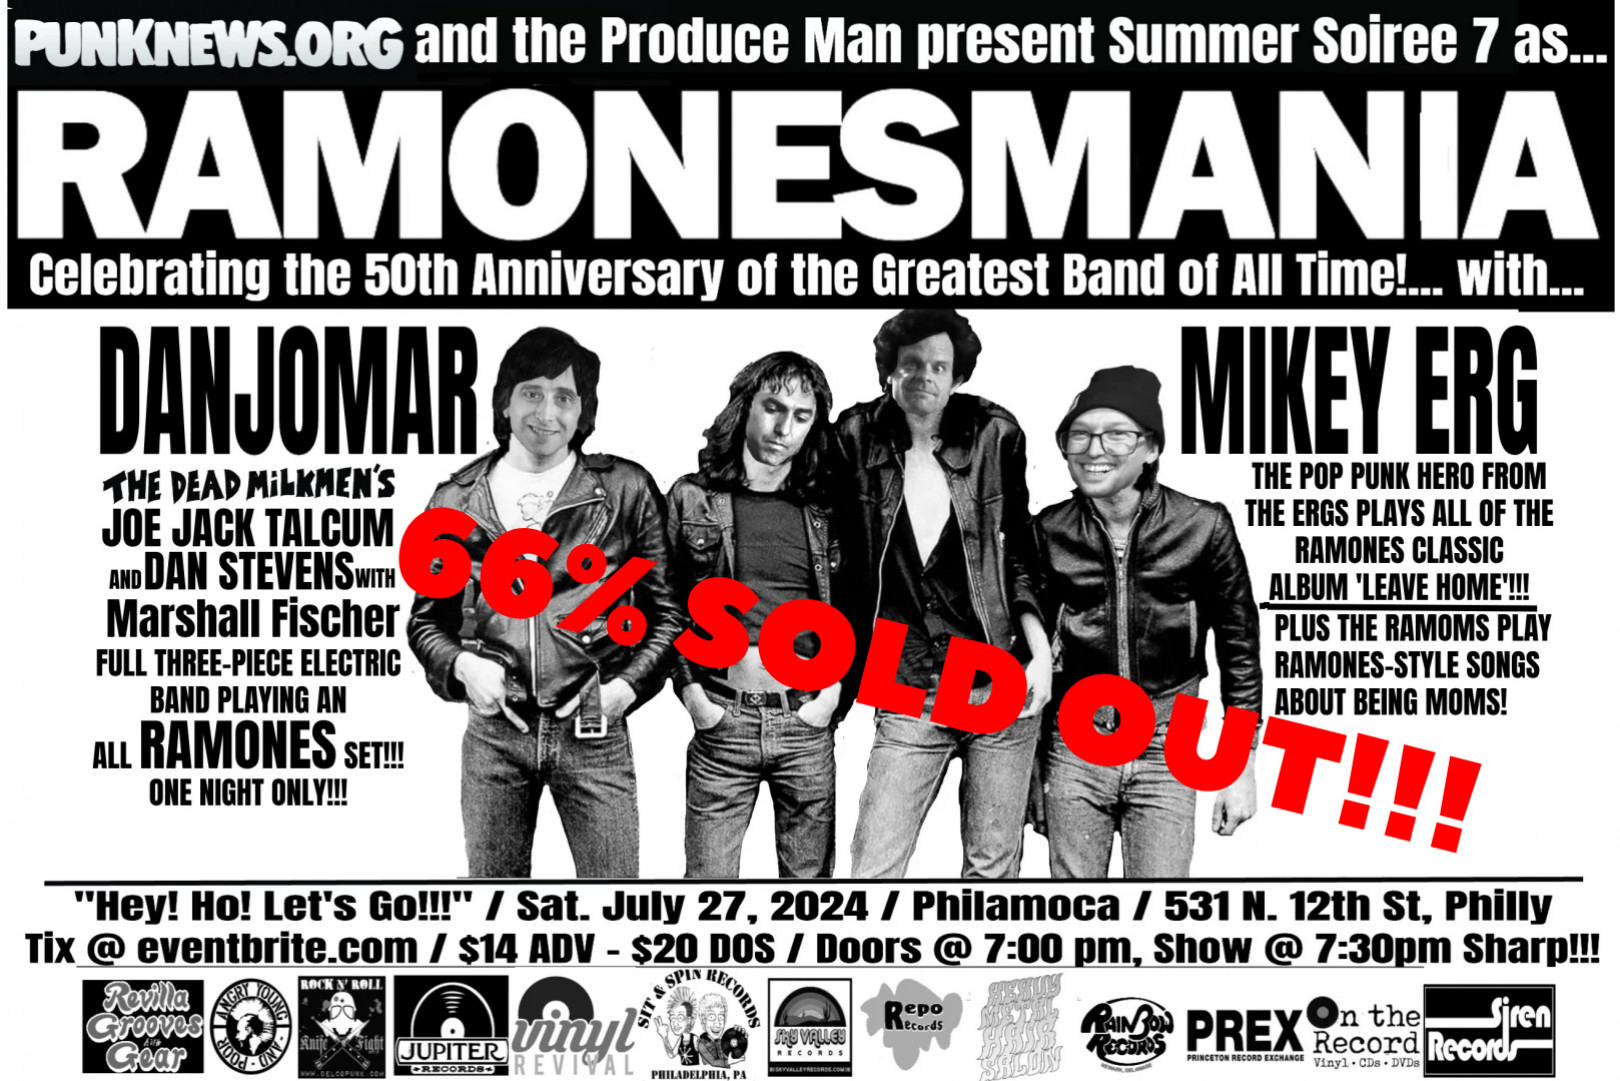 RAMONESMANIA, with DanJoMar, Mikey Erg, and Ramoms, is now 66% sold out!!!